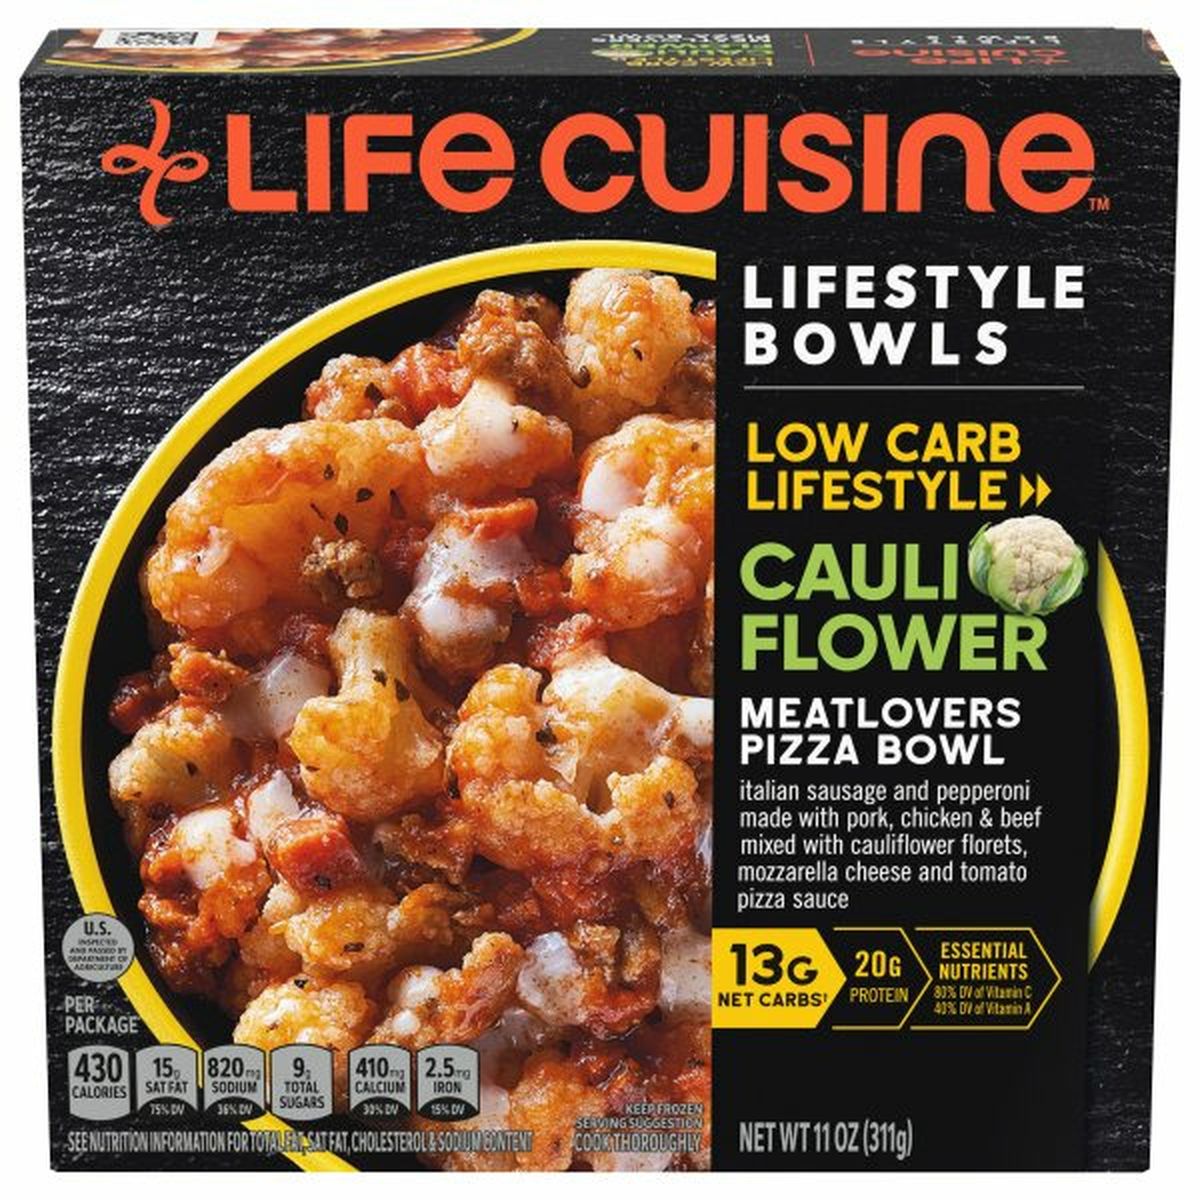 Calories in Life Cuisine Lifestyle Bowl, Low Carb, Cauliflower Meatlovers Pizza